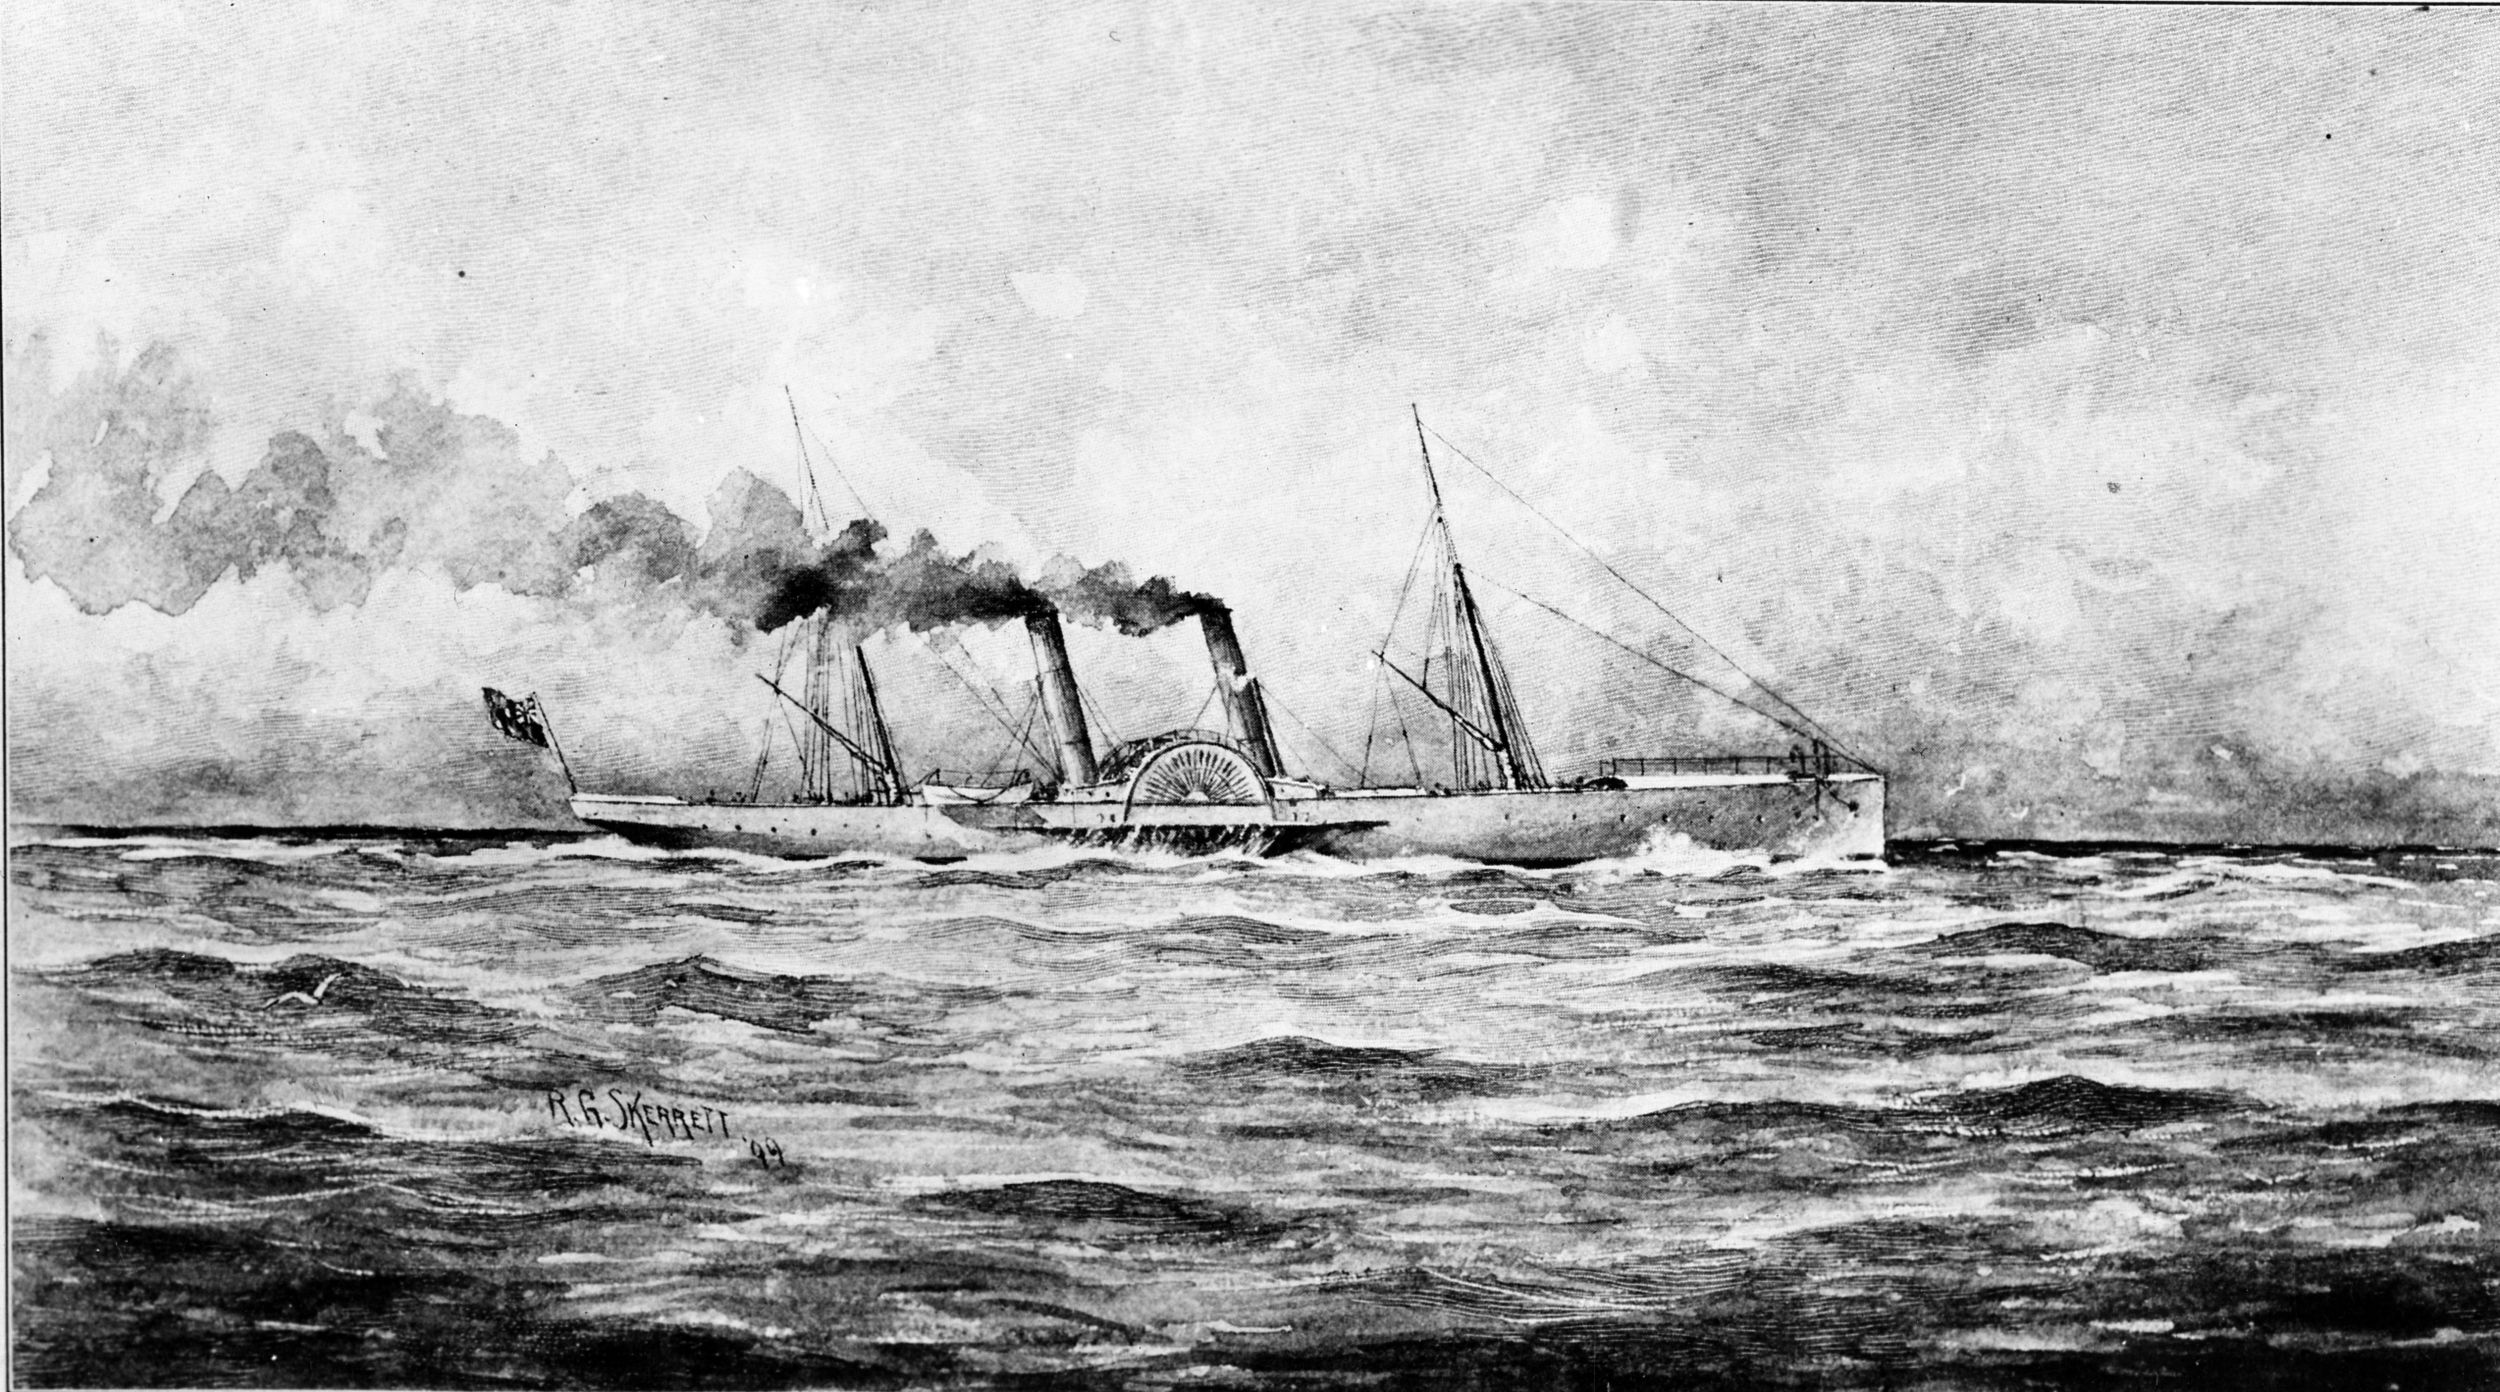 The original Banshee, built in 1862 in Liverpool, was captured in 1863 and sold to the U.S. Navy; she became part of the North Atlantic Blockading Squadron. 